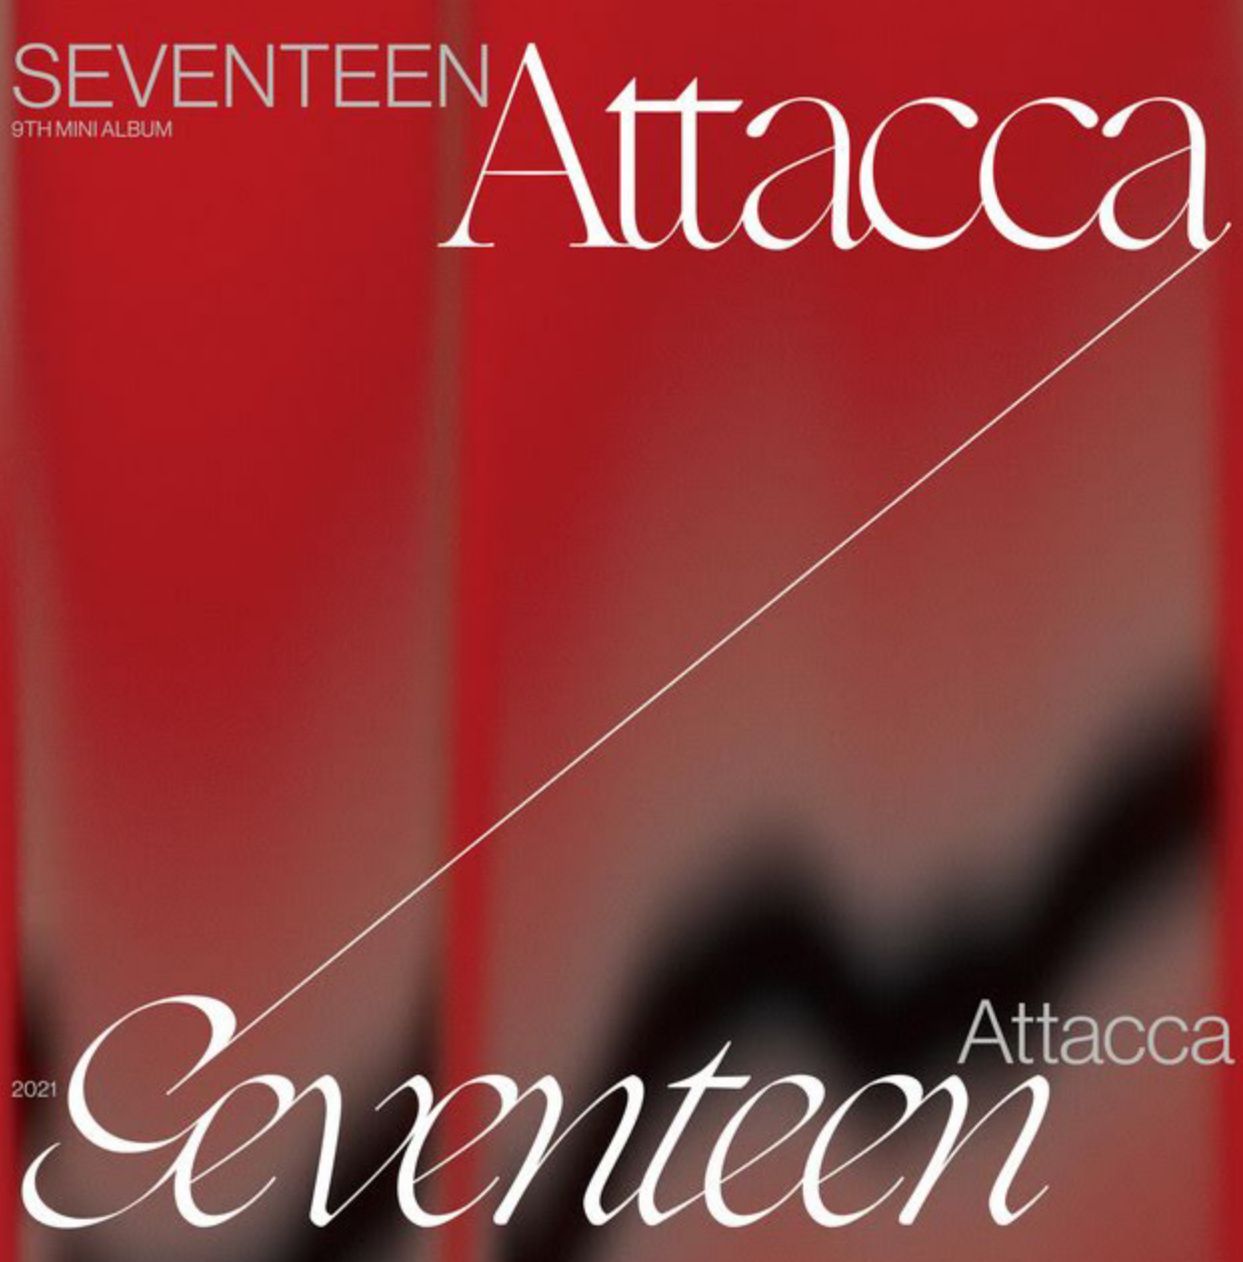 Attacca by SEVENTEEN